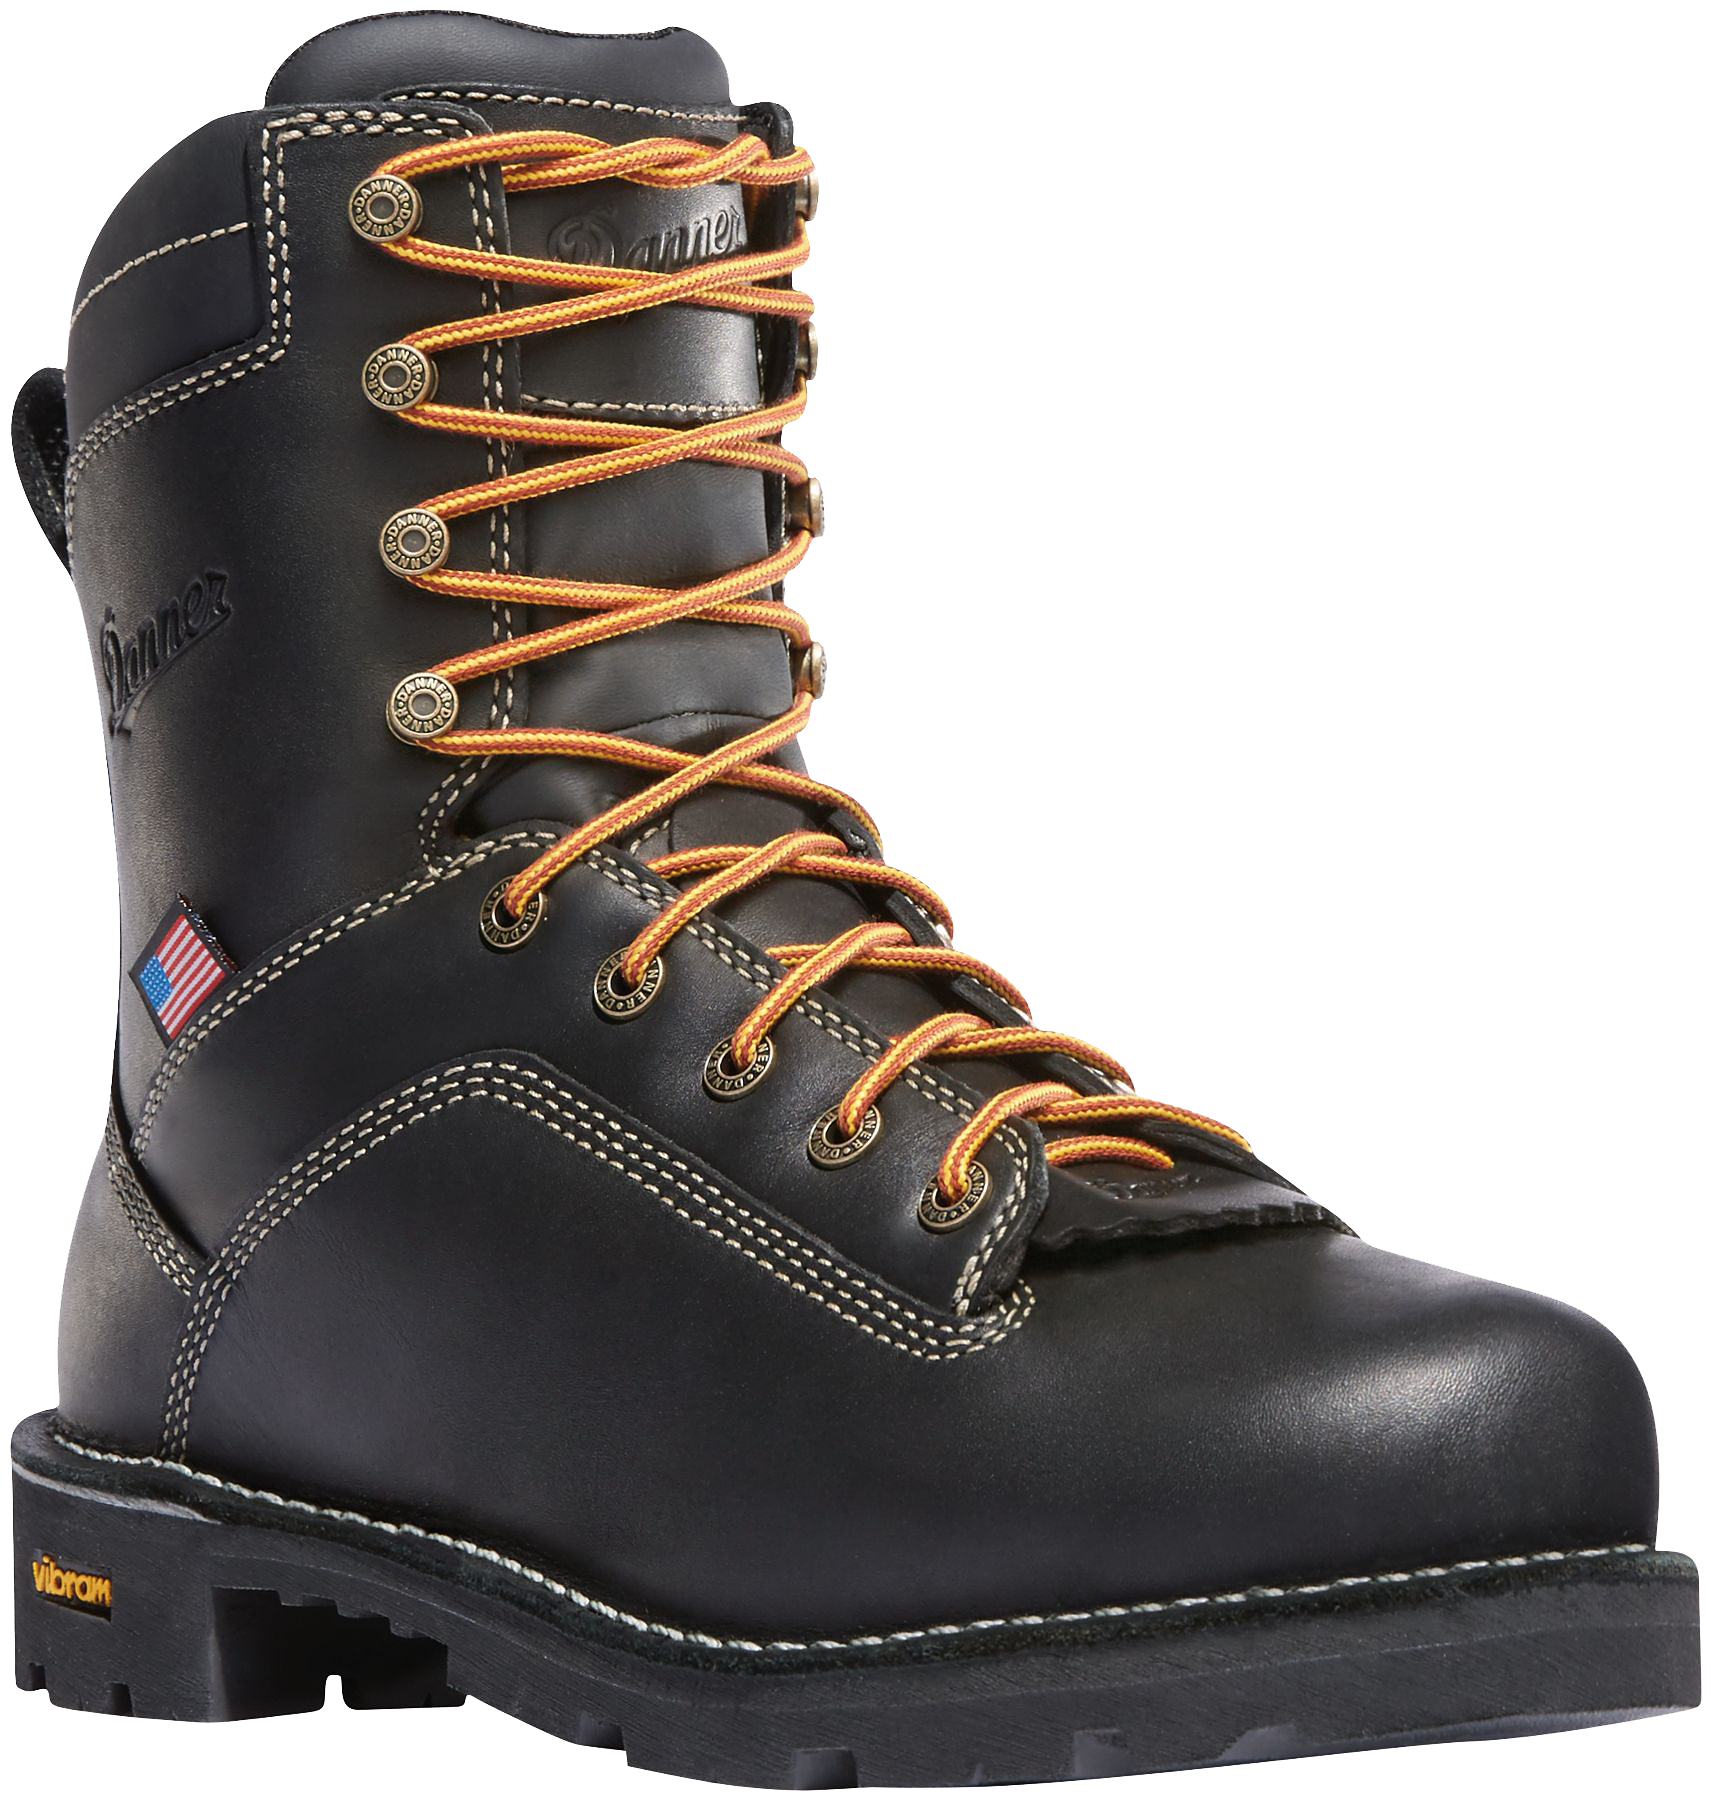 Danner Quarry USA Brown GORE-TEX Alloy Toe Work Boots for Men - Black - 13W